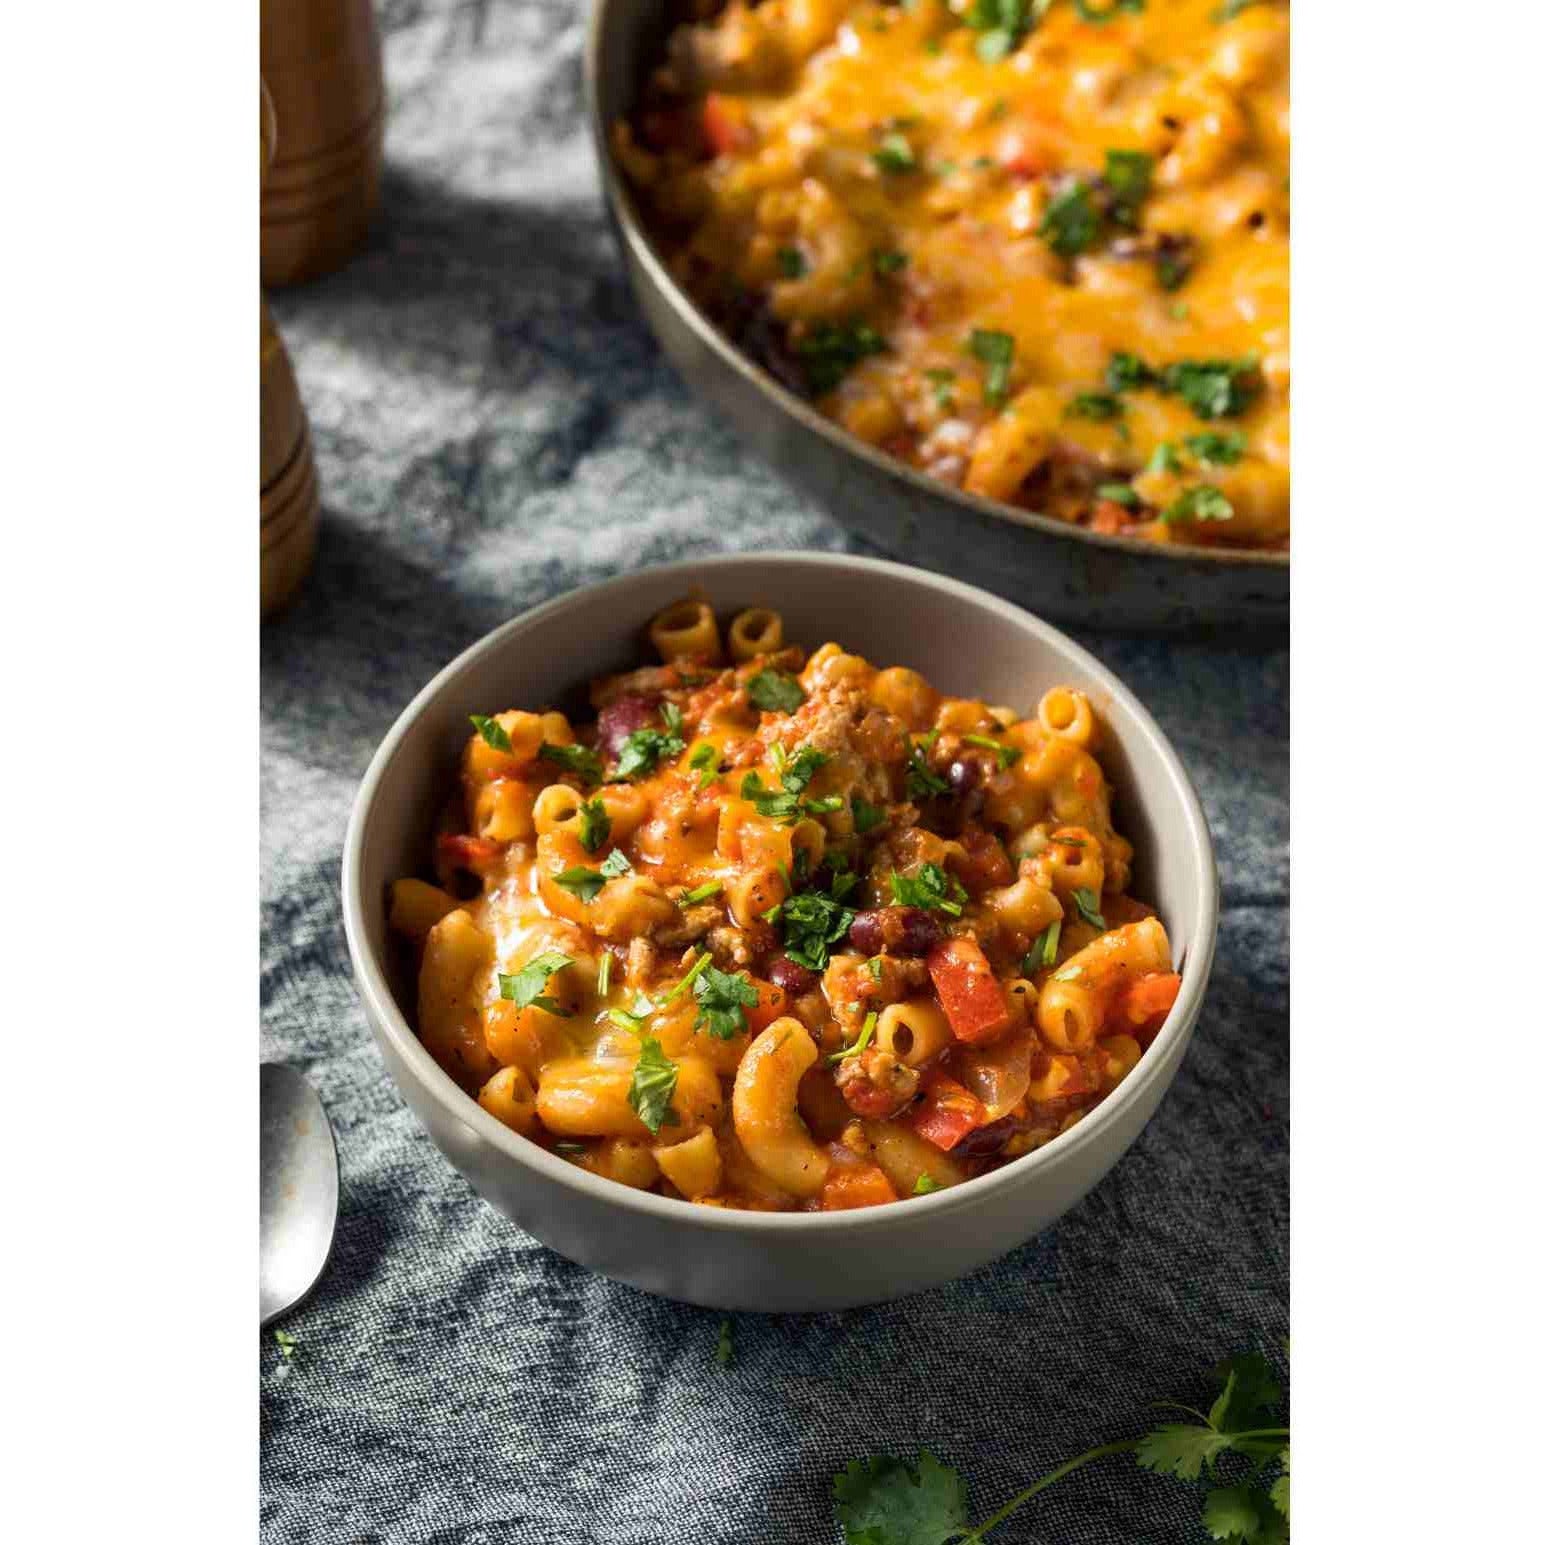 Chili Mac 'n Cheese One Pot Dish with pasta included - Kitcheneez Mixes & More!